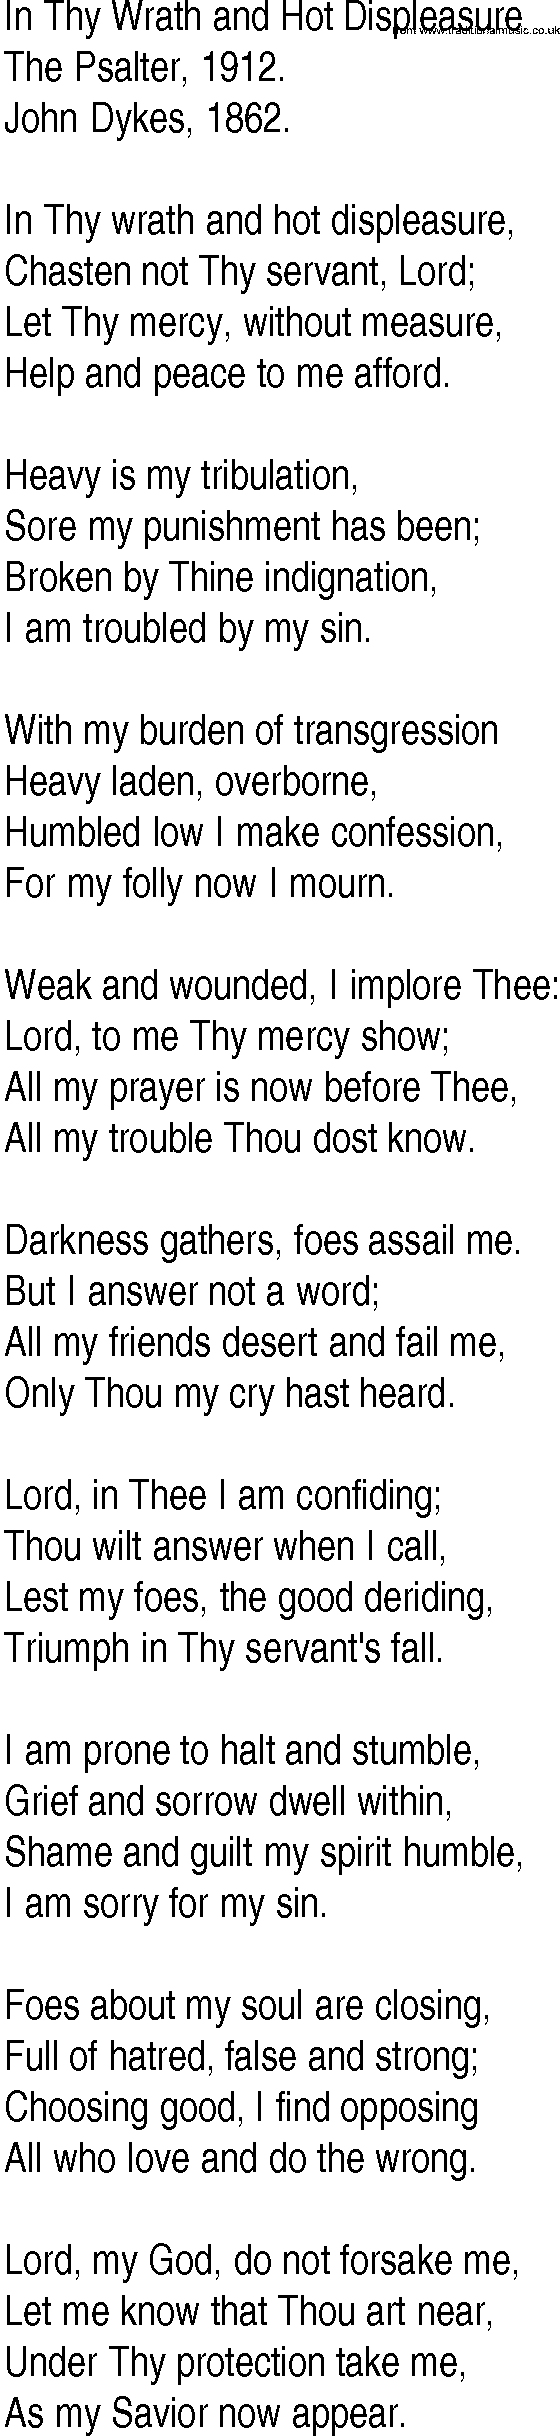 Hymn and Gospel Song: In Thy Wrath and Hot Displeasure by The Psalter lyrics